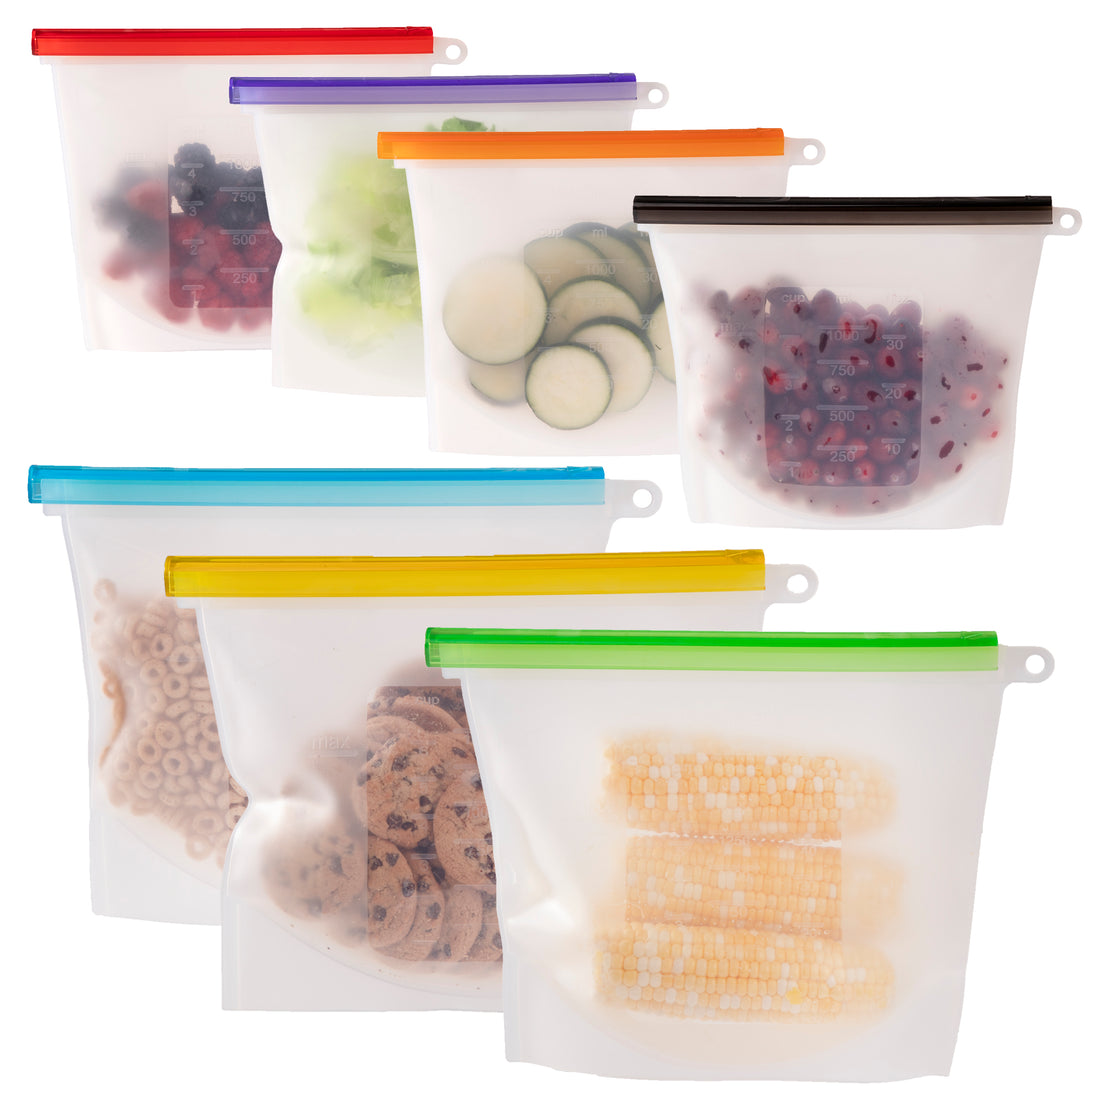 Reusable Silicone Food Storage Bags,WOHOME Airtight Seal Food